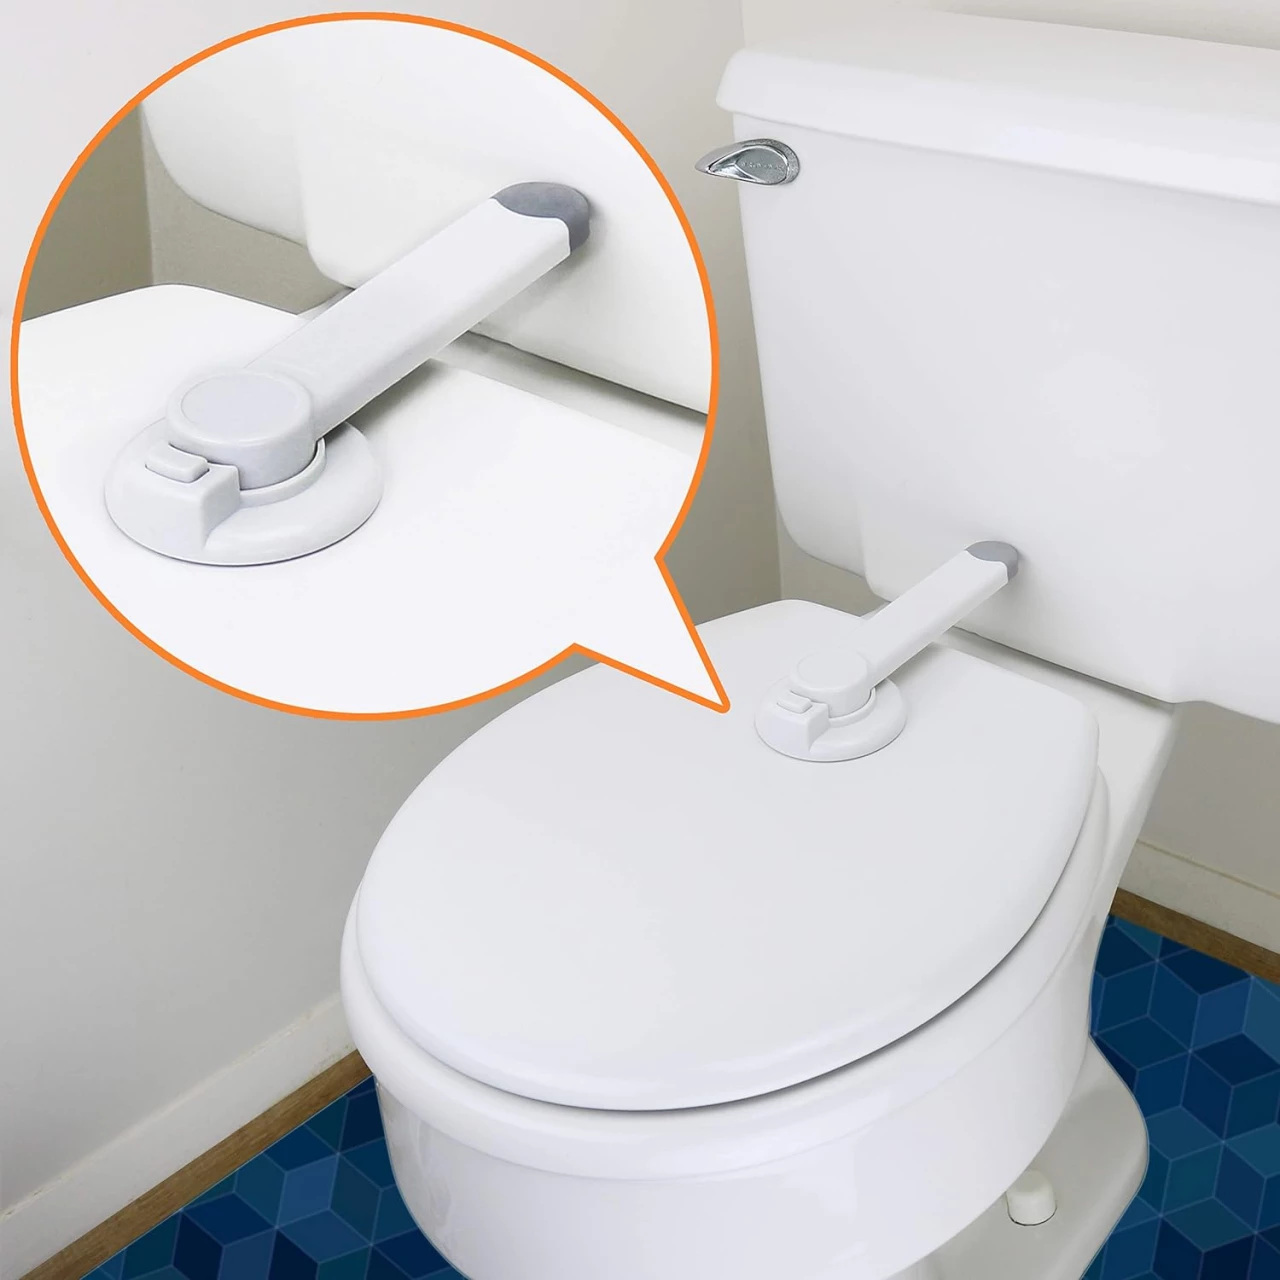 Toilet Lock Child Safety - Ideal Baby Proof Toilet Seat Lock with 3M Adhesive | Easy Installation, No Tools Needed